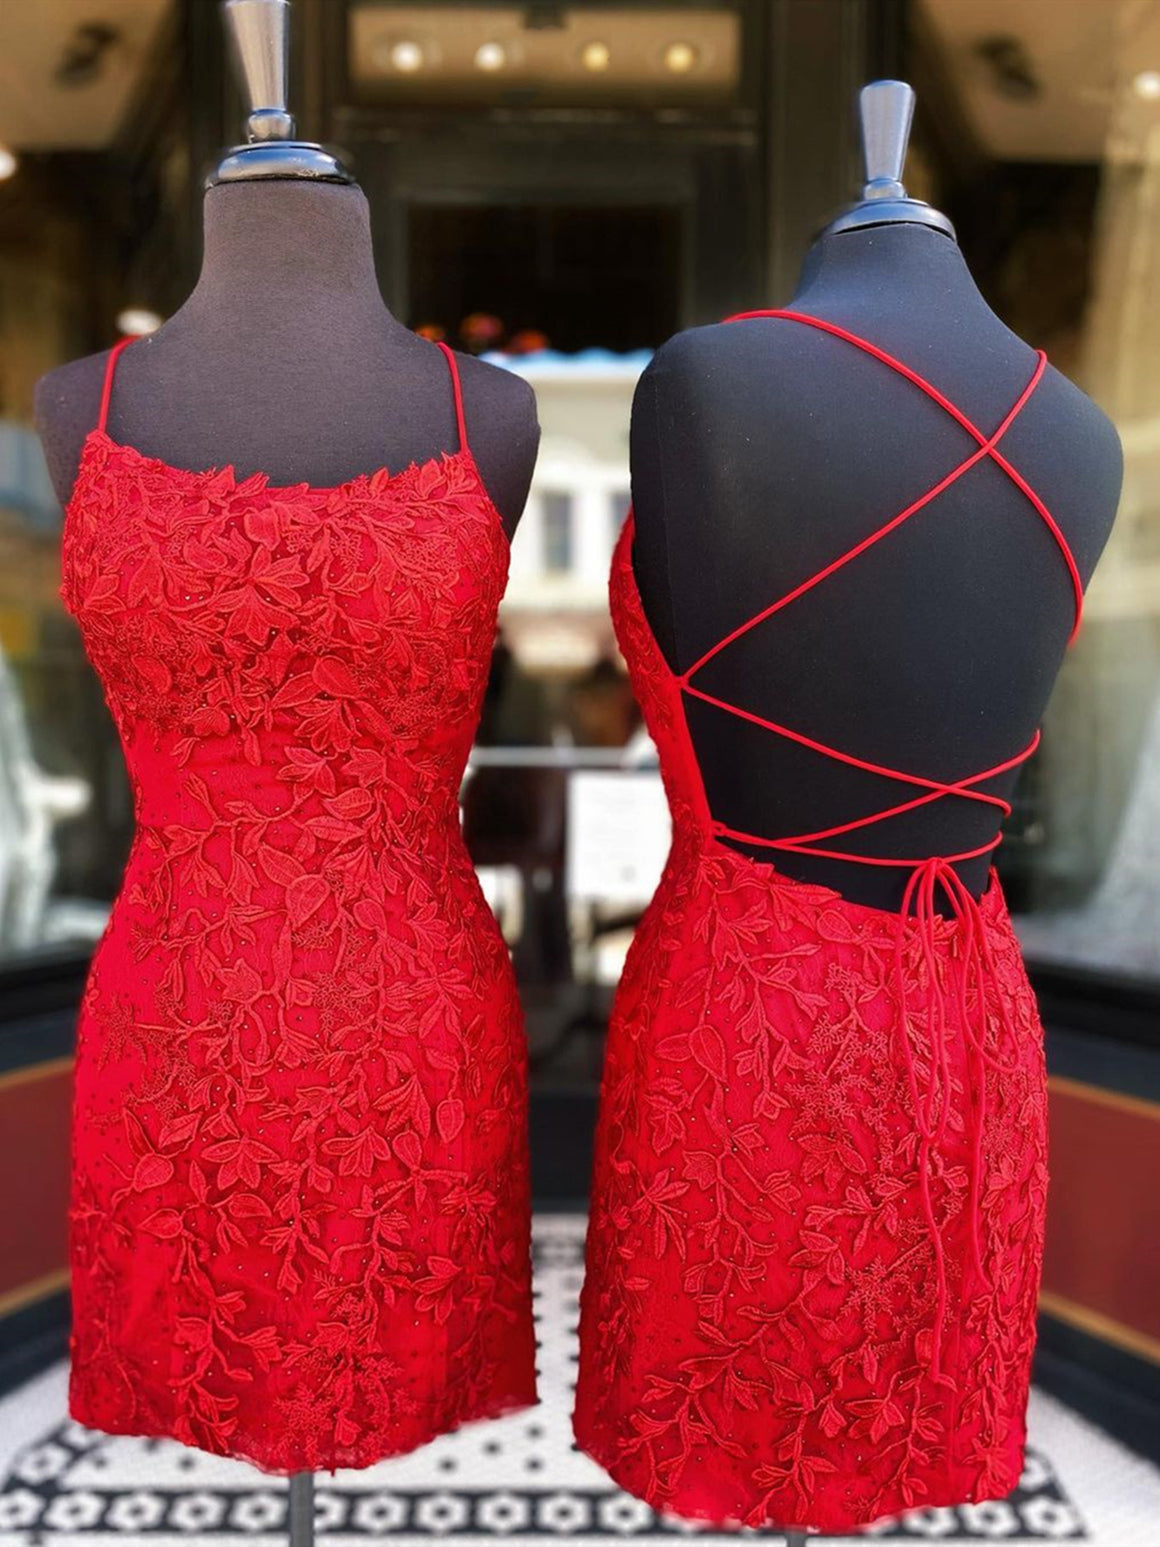 Short Red Backless Lace Prom Dresses, Short Backless Red Lace Graduation Homecoming Dresses